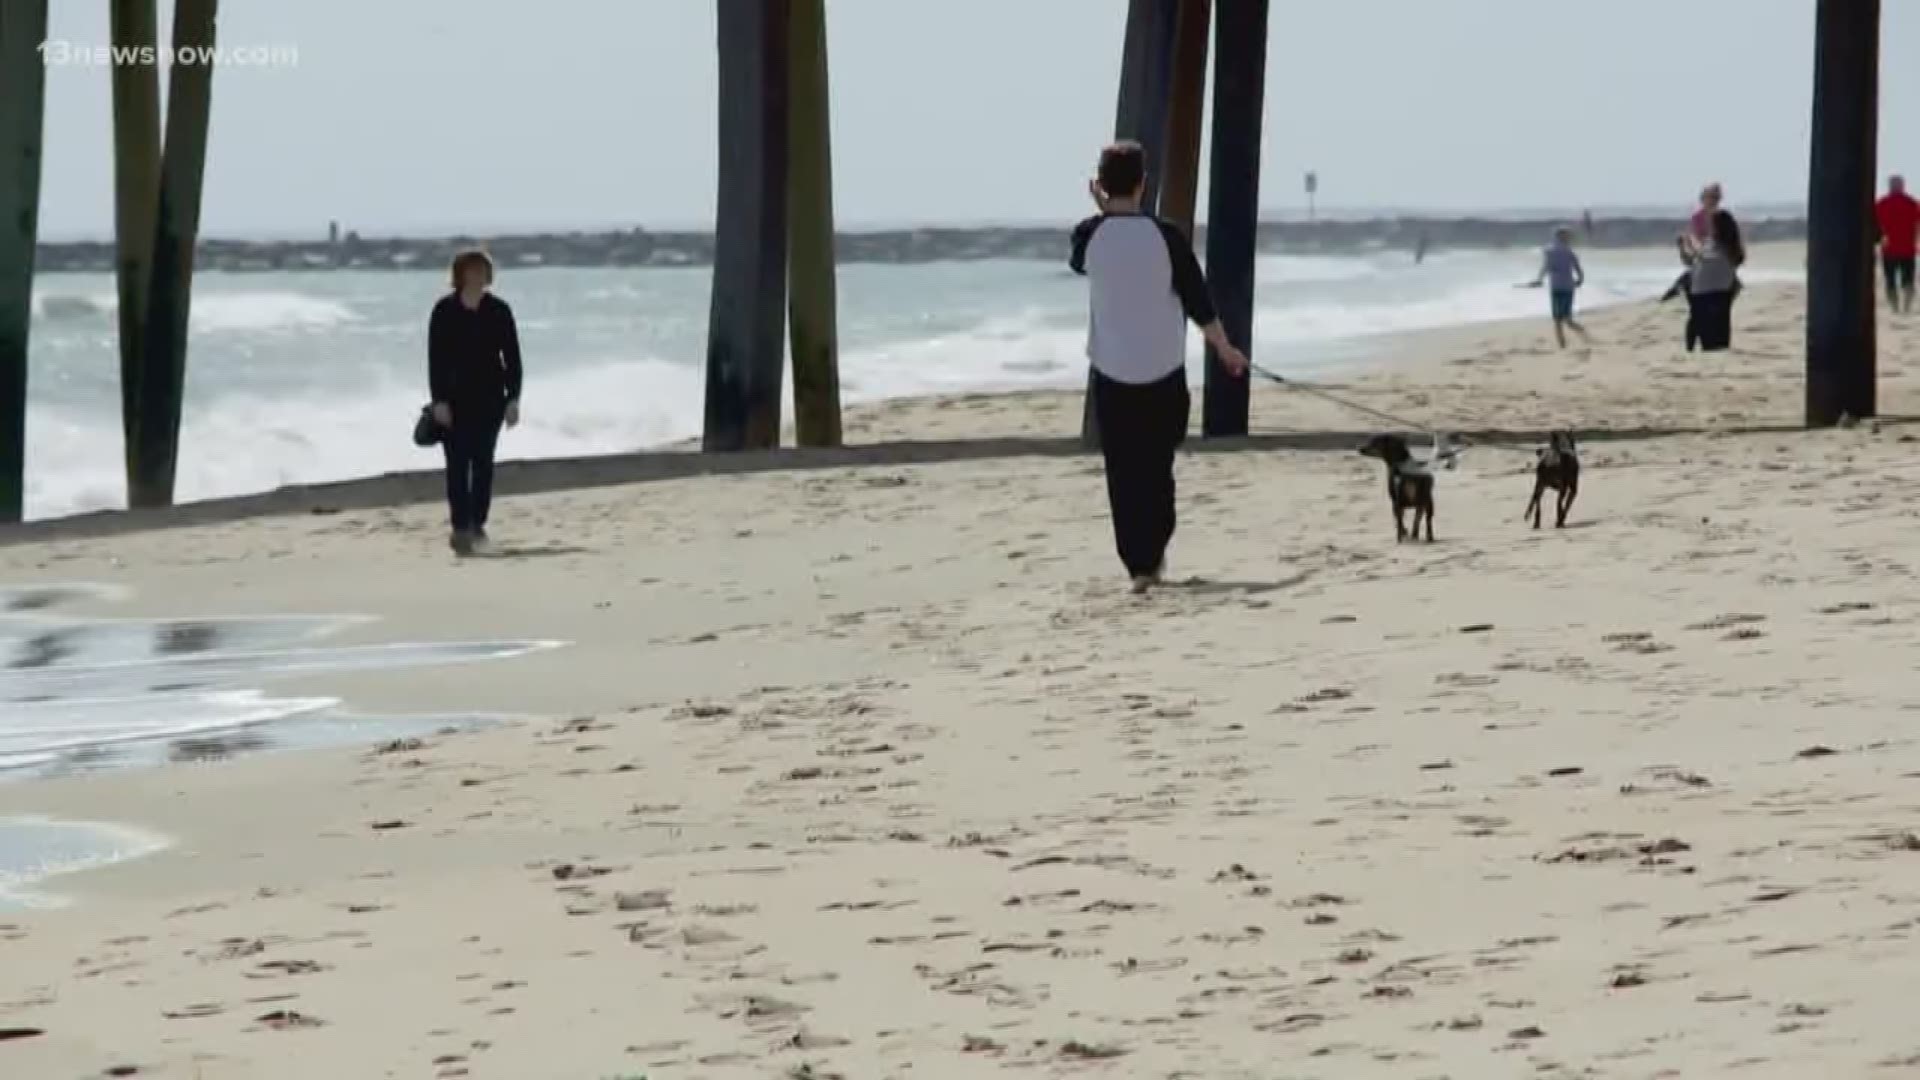 A local veterinarian said this weather could be life-threatening to animals. The sand in Virginia Beach was 145 degrees Monday. The hot ground can give dogs third-degree burns on their paws and they can get heatstroke.